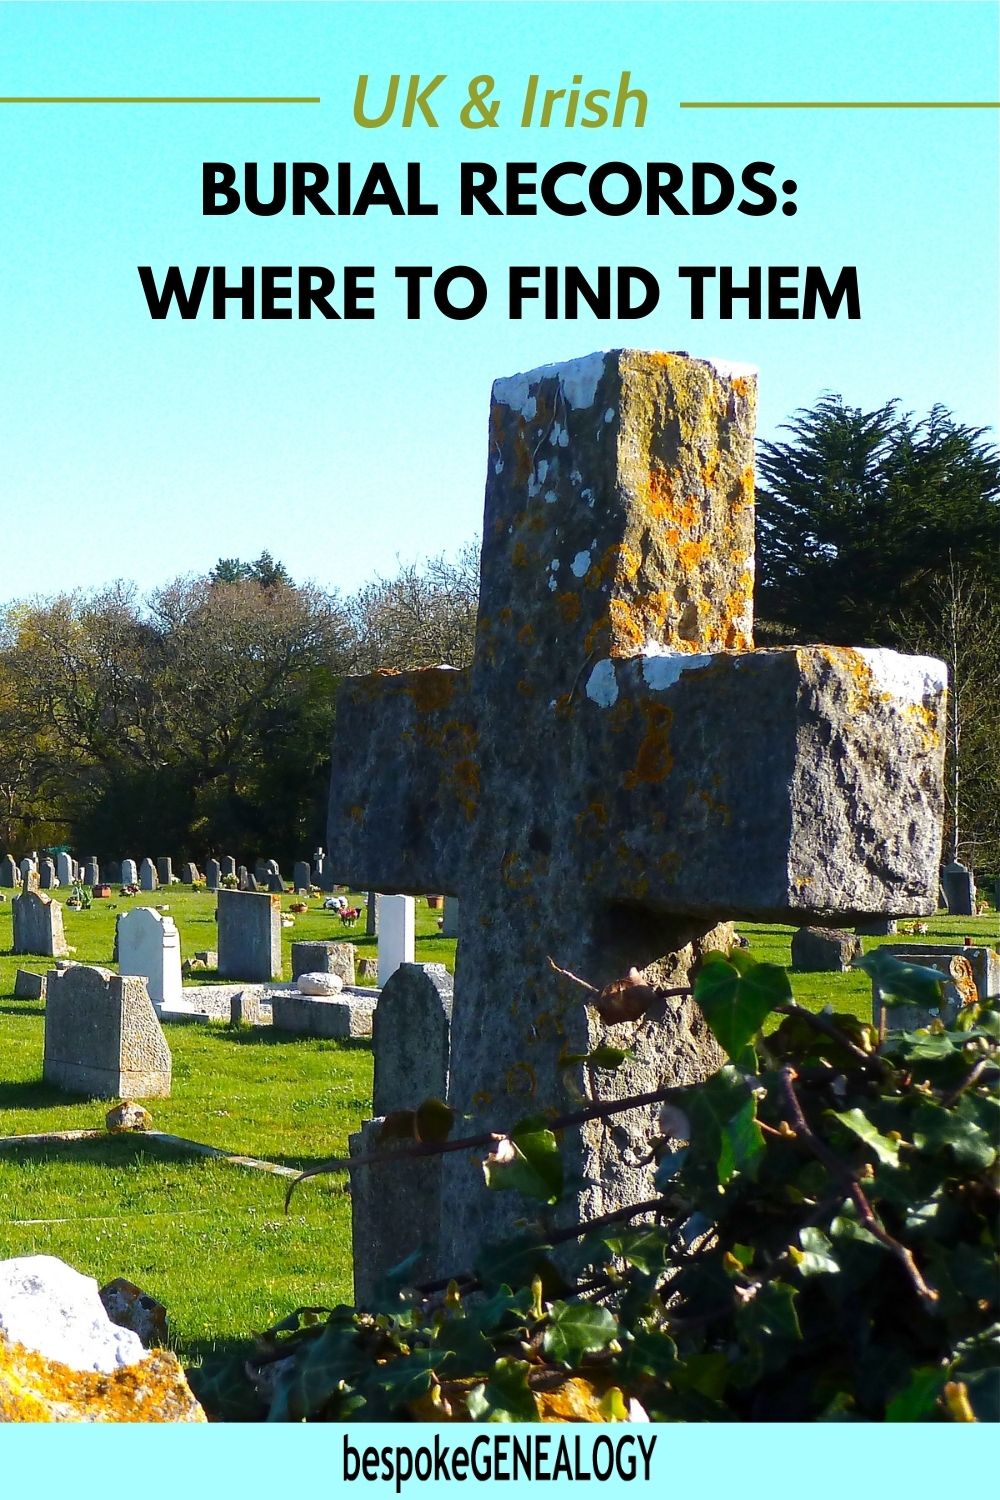 UK and Irish burial records: where to find them. Photo of a UK graveyard